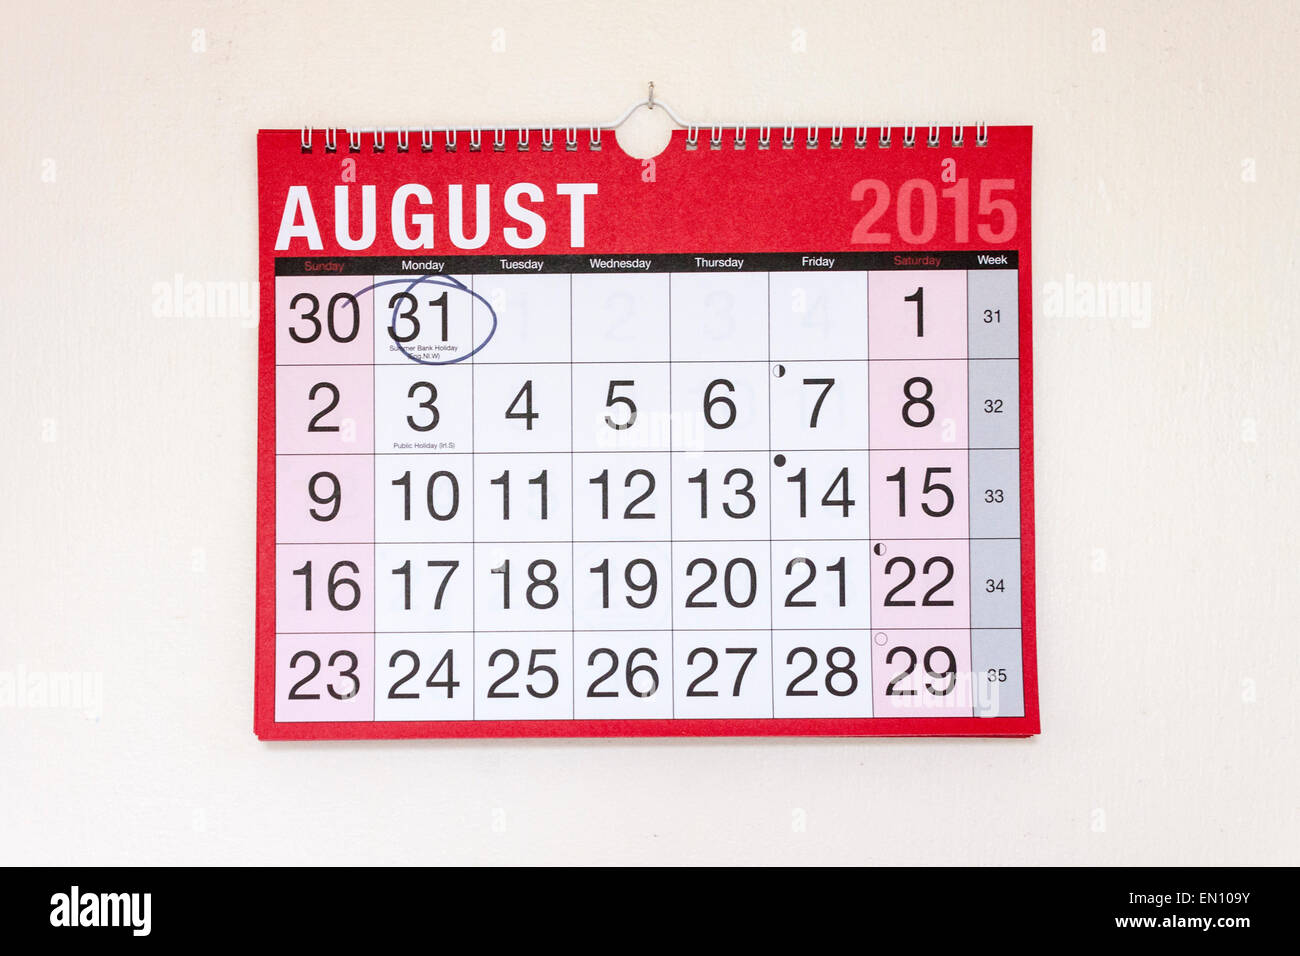 Monthly wall calendar August 2015, August Bank Holiday circled Stock Photo